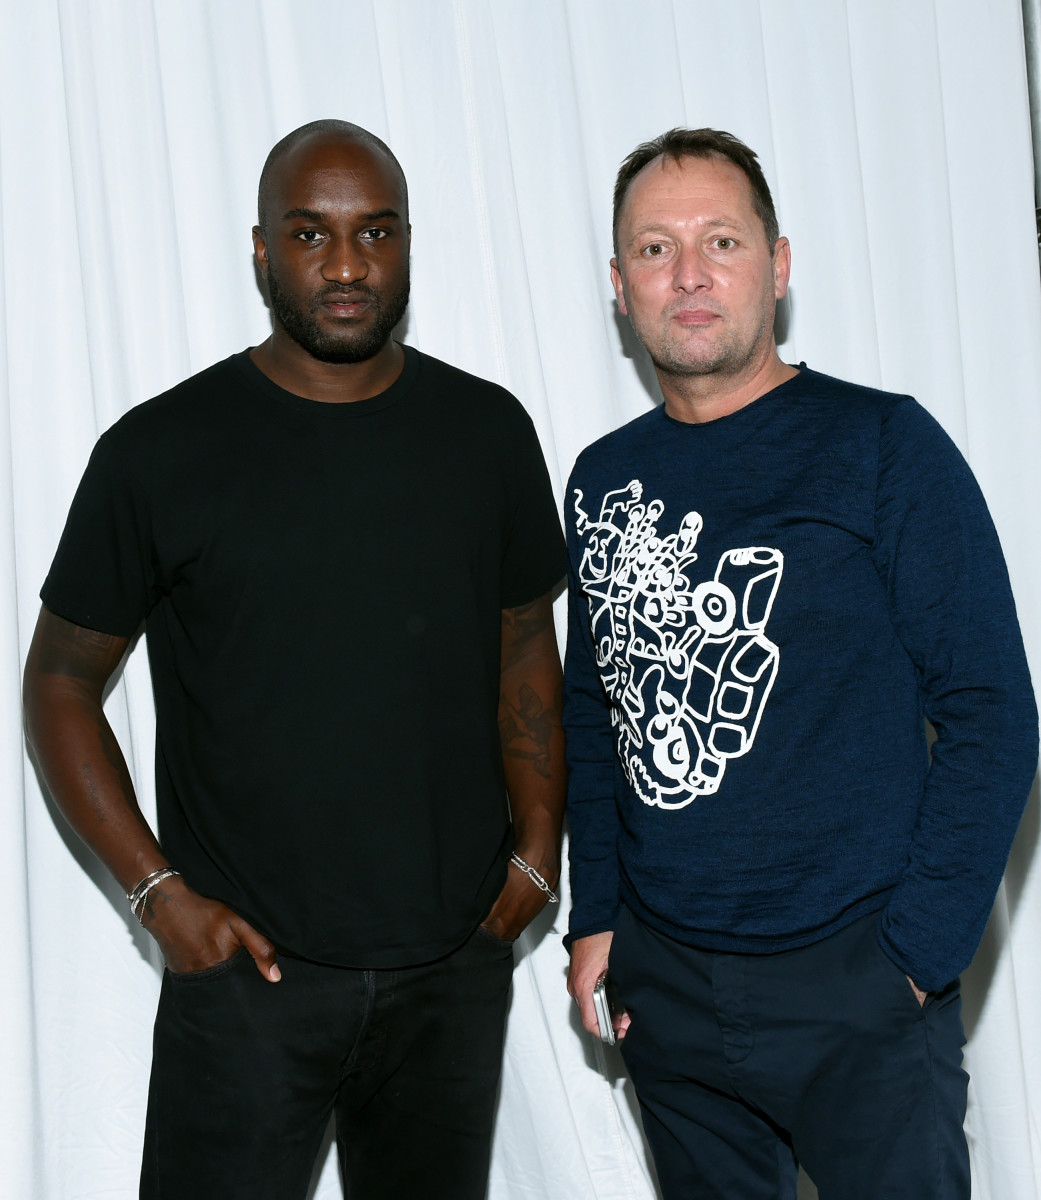 Virgil Abloh and Henrik Most attended the 4th Annual Fashion Tech Forum Conference in Los Angeles, CA on October 6, 2017. Photo: Graylock/Fashion Tech Forum